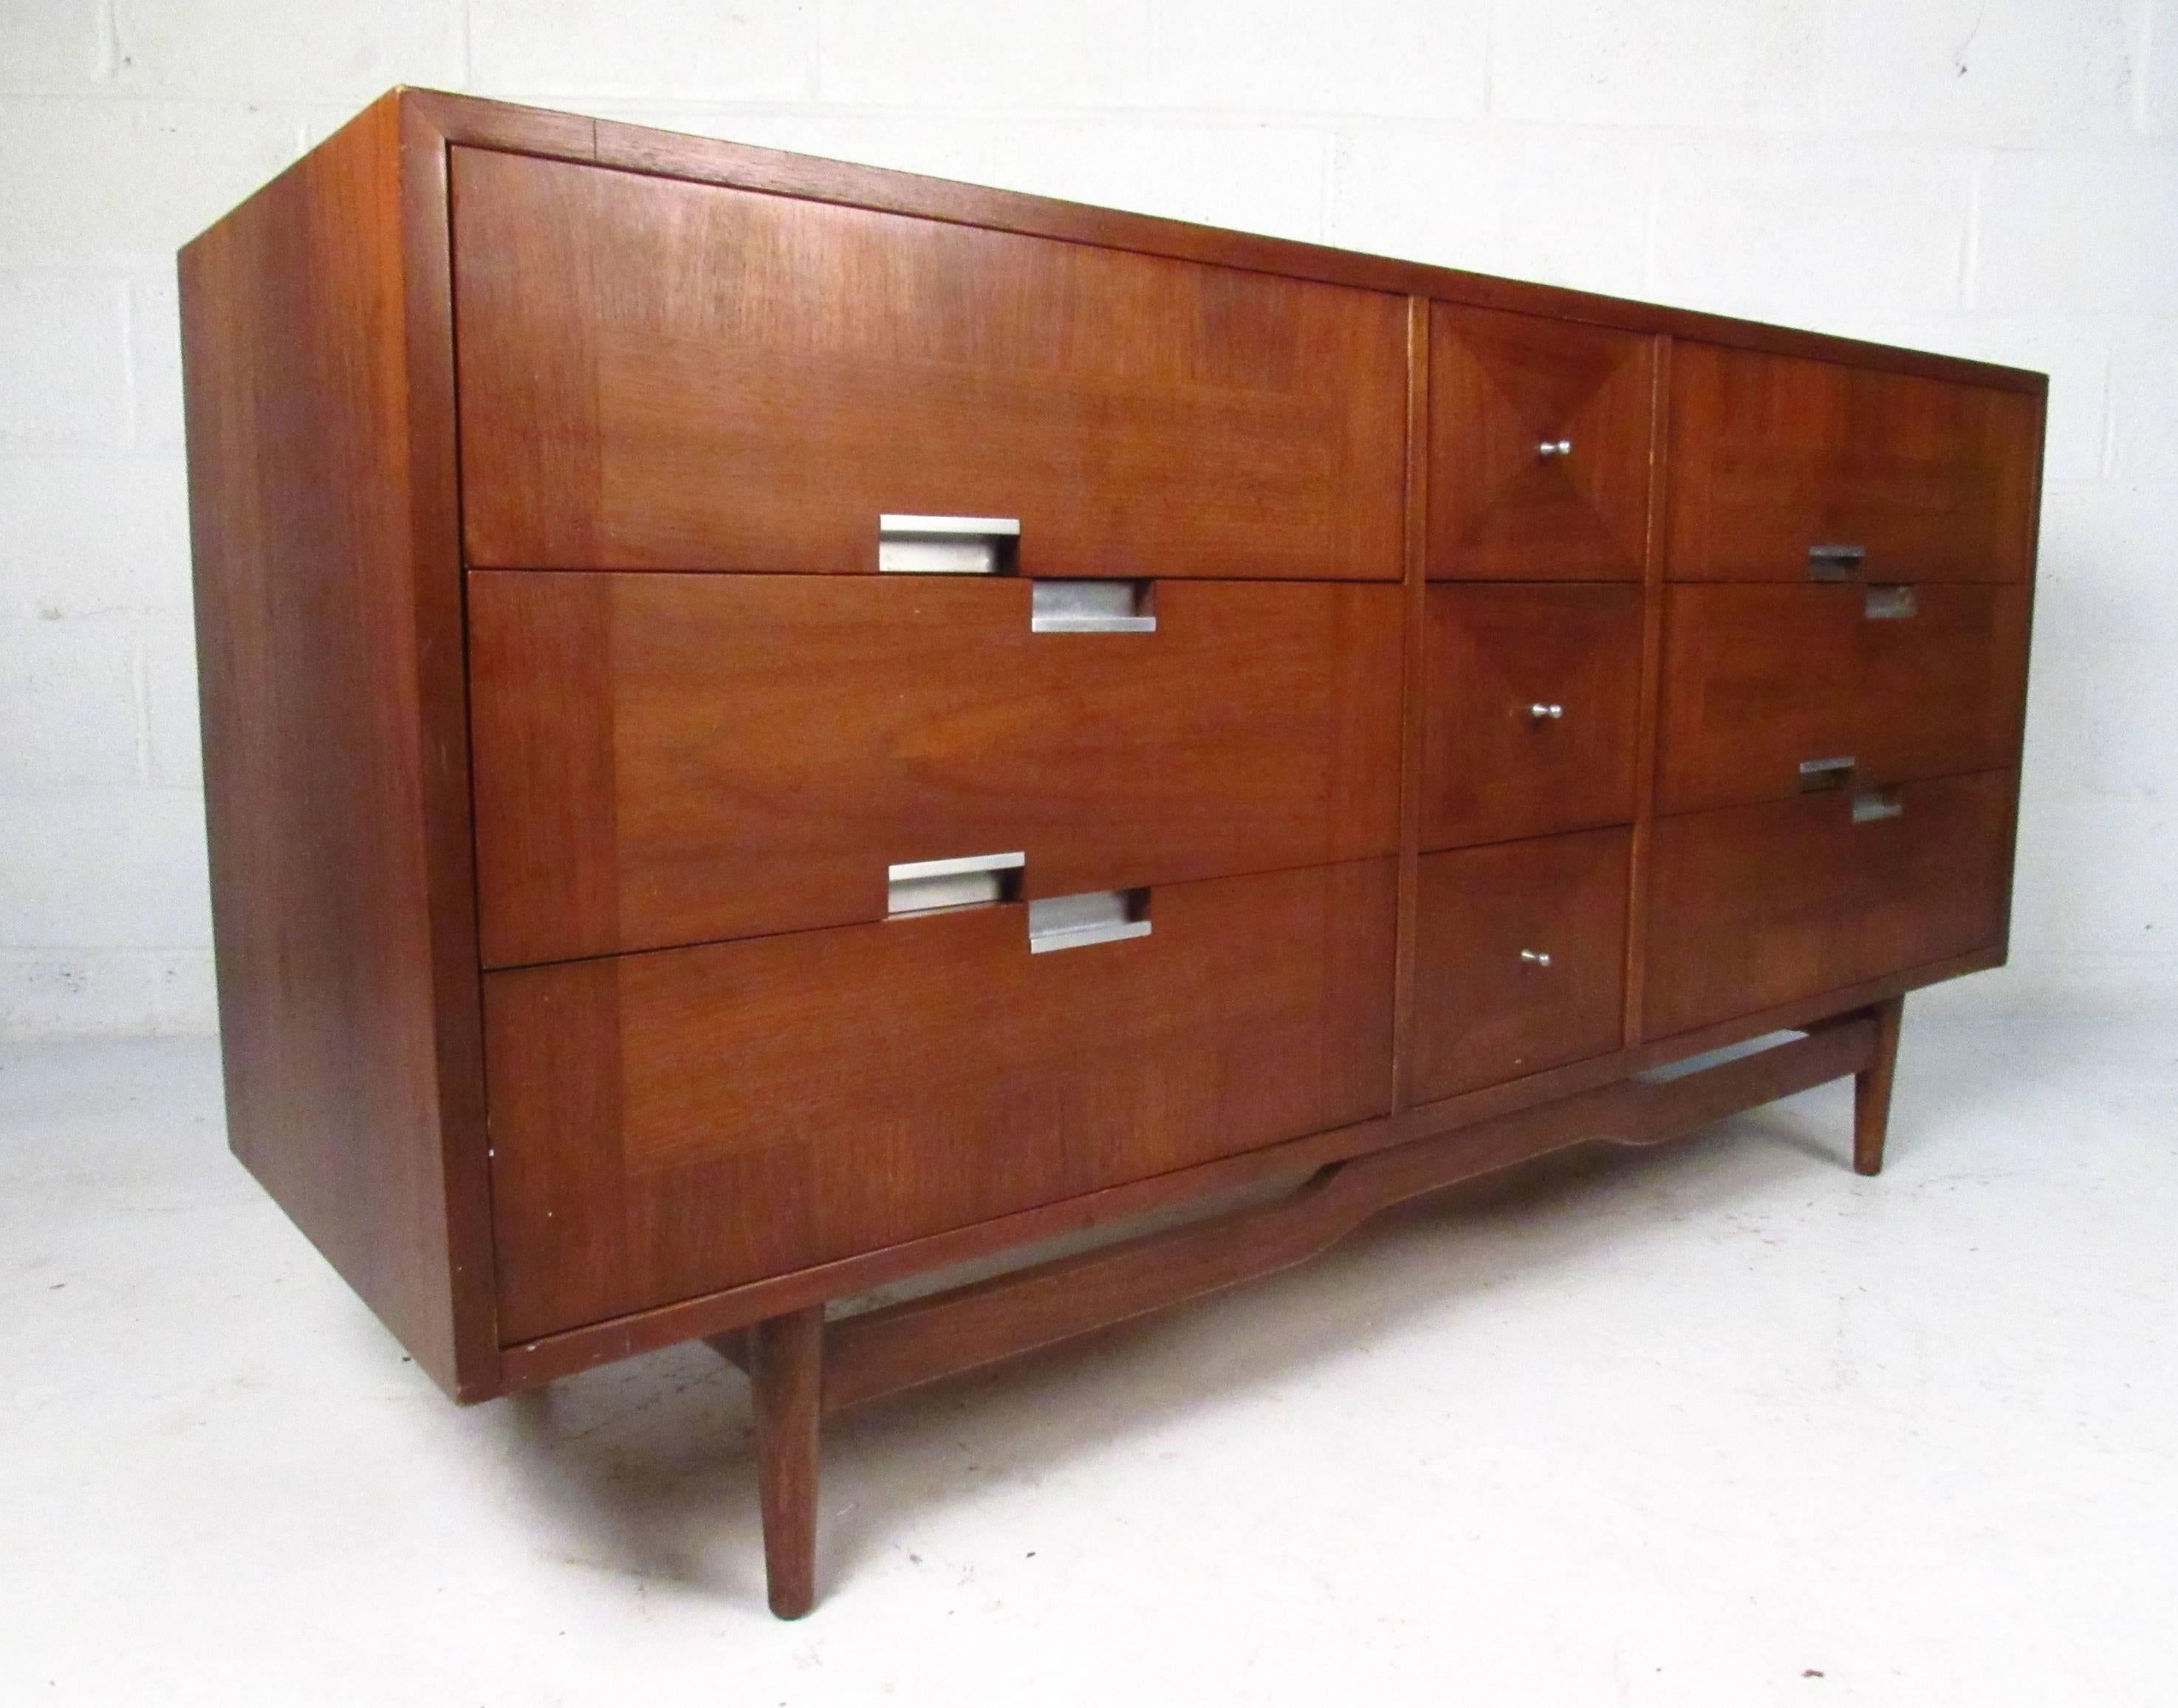 This beautiful walnut dresser features unique mid-century drawer pulls, banded veneer drawer fronts, and an assortment of drawers perfect for organizing in any room. Unique in-lays add to its appeal, while stretchers add to its durability. Please